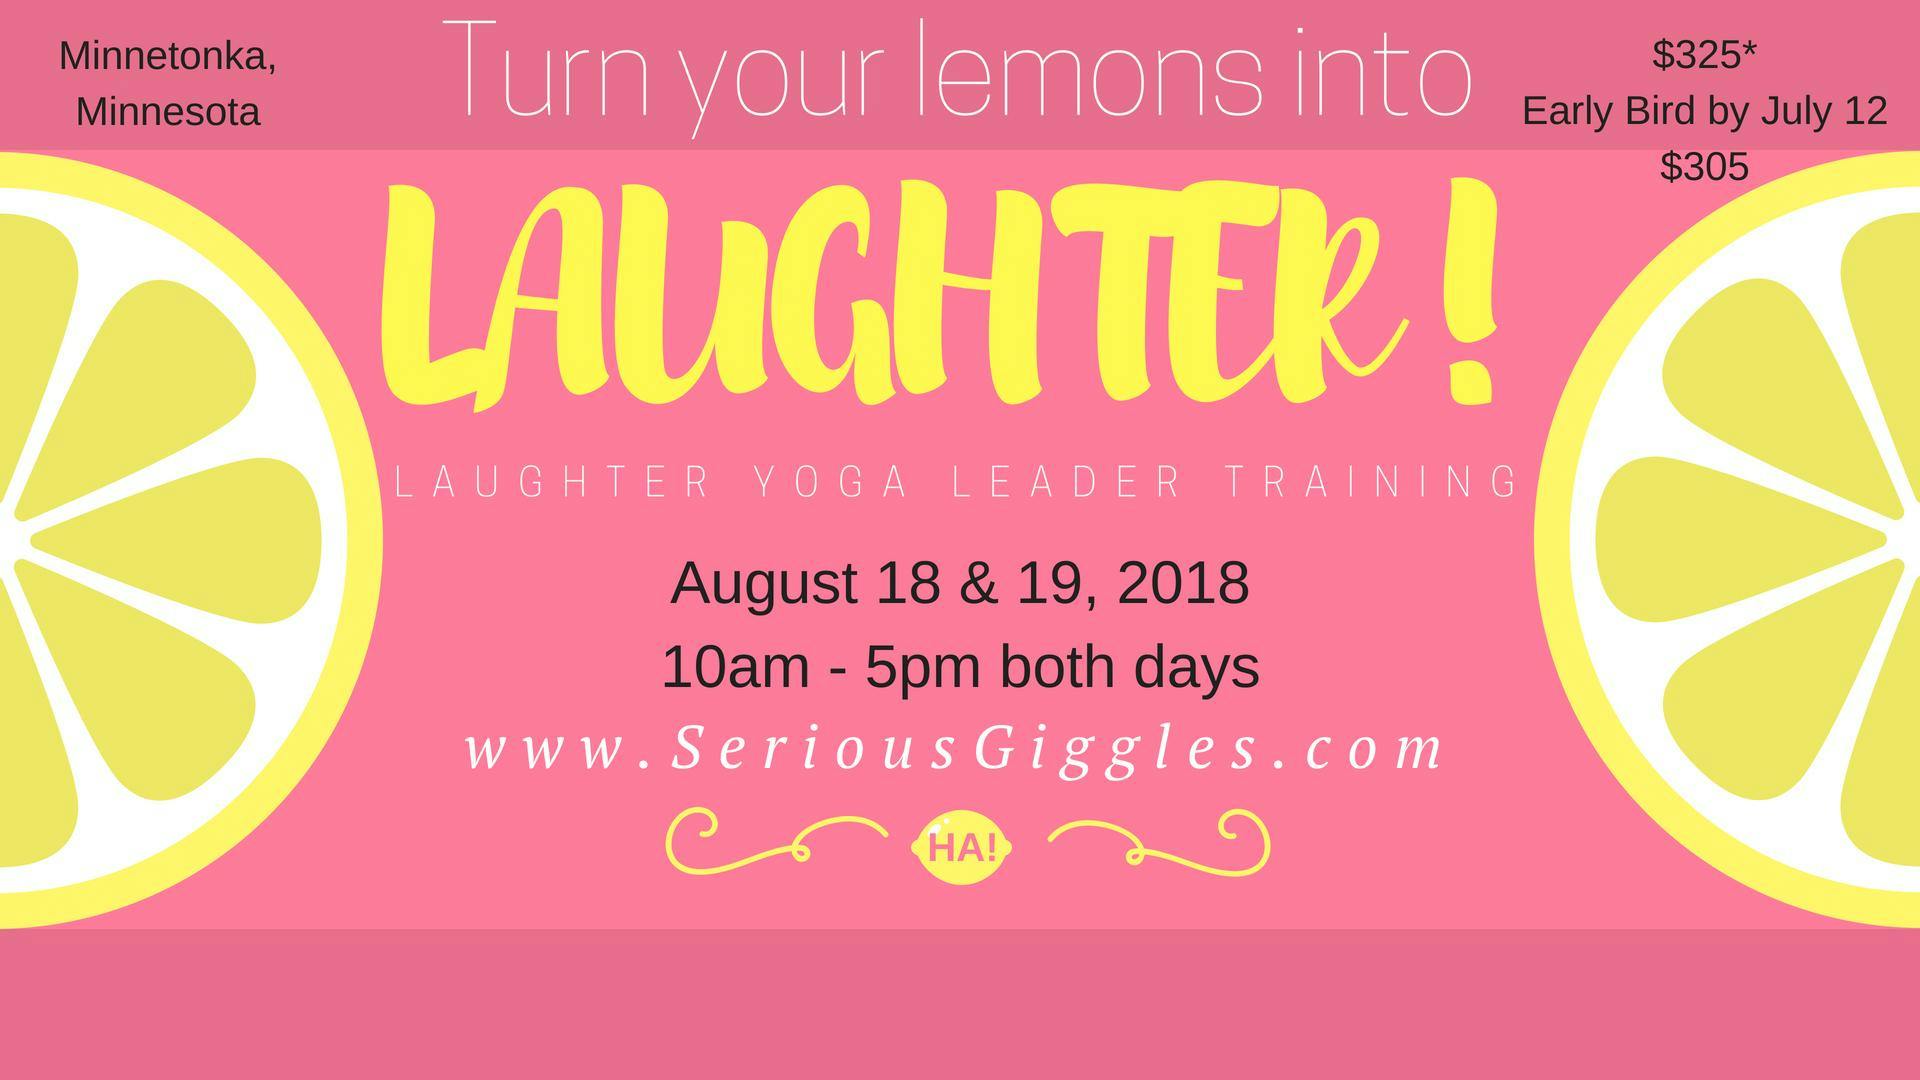 Laughter Yoga Leader Training will Tickle your Funny Bone!